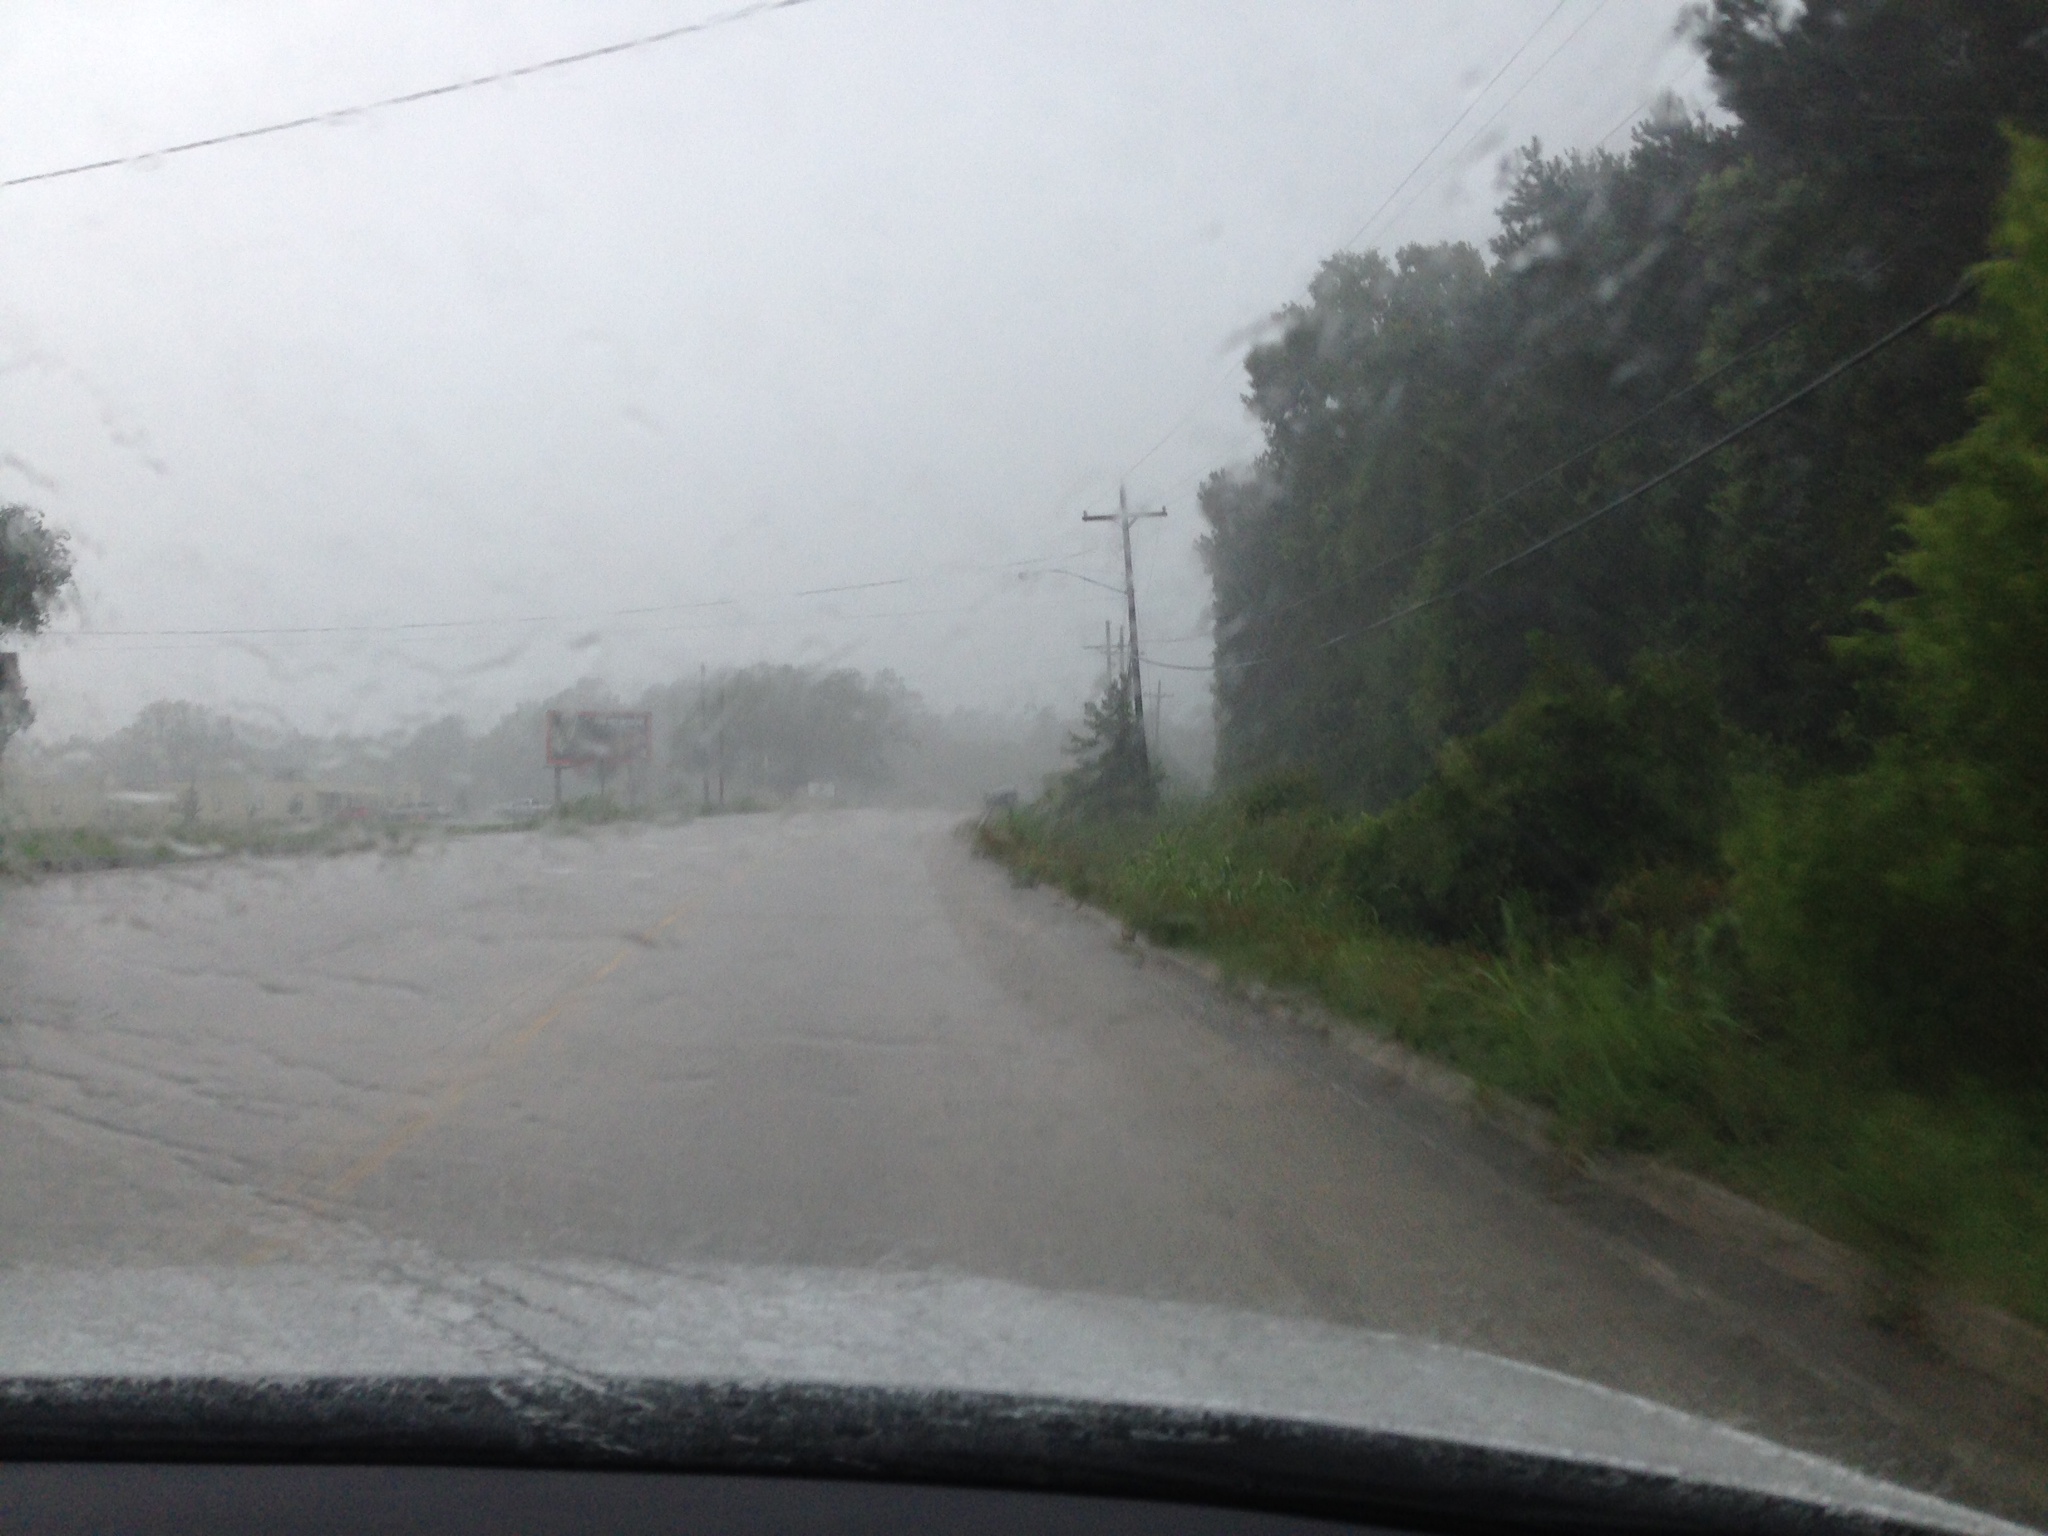 It was so rainy on the first day! I could barely see the road as I drove!